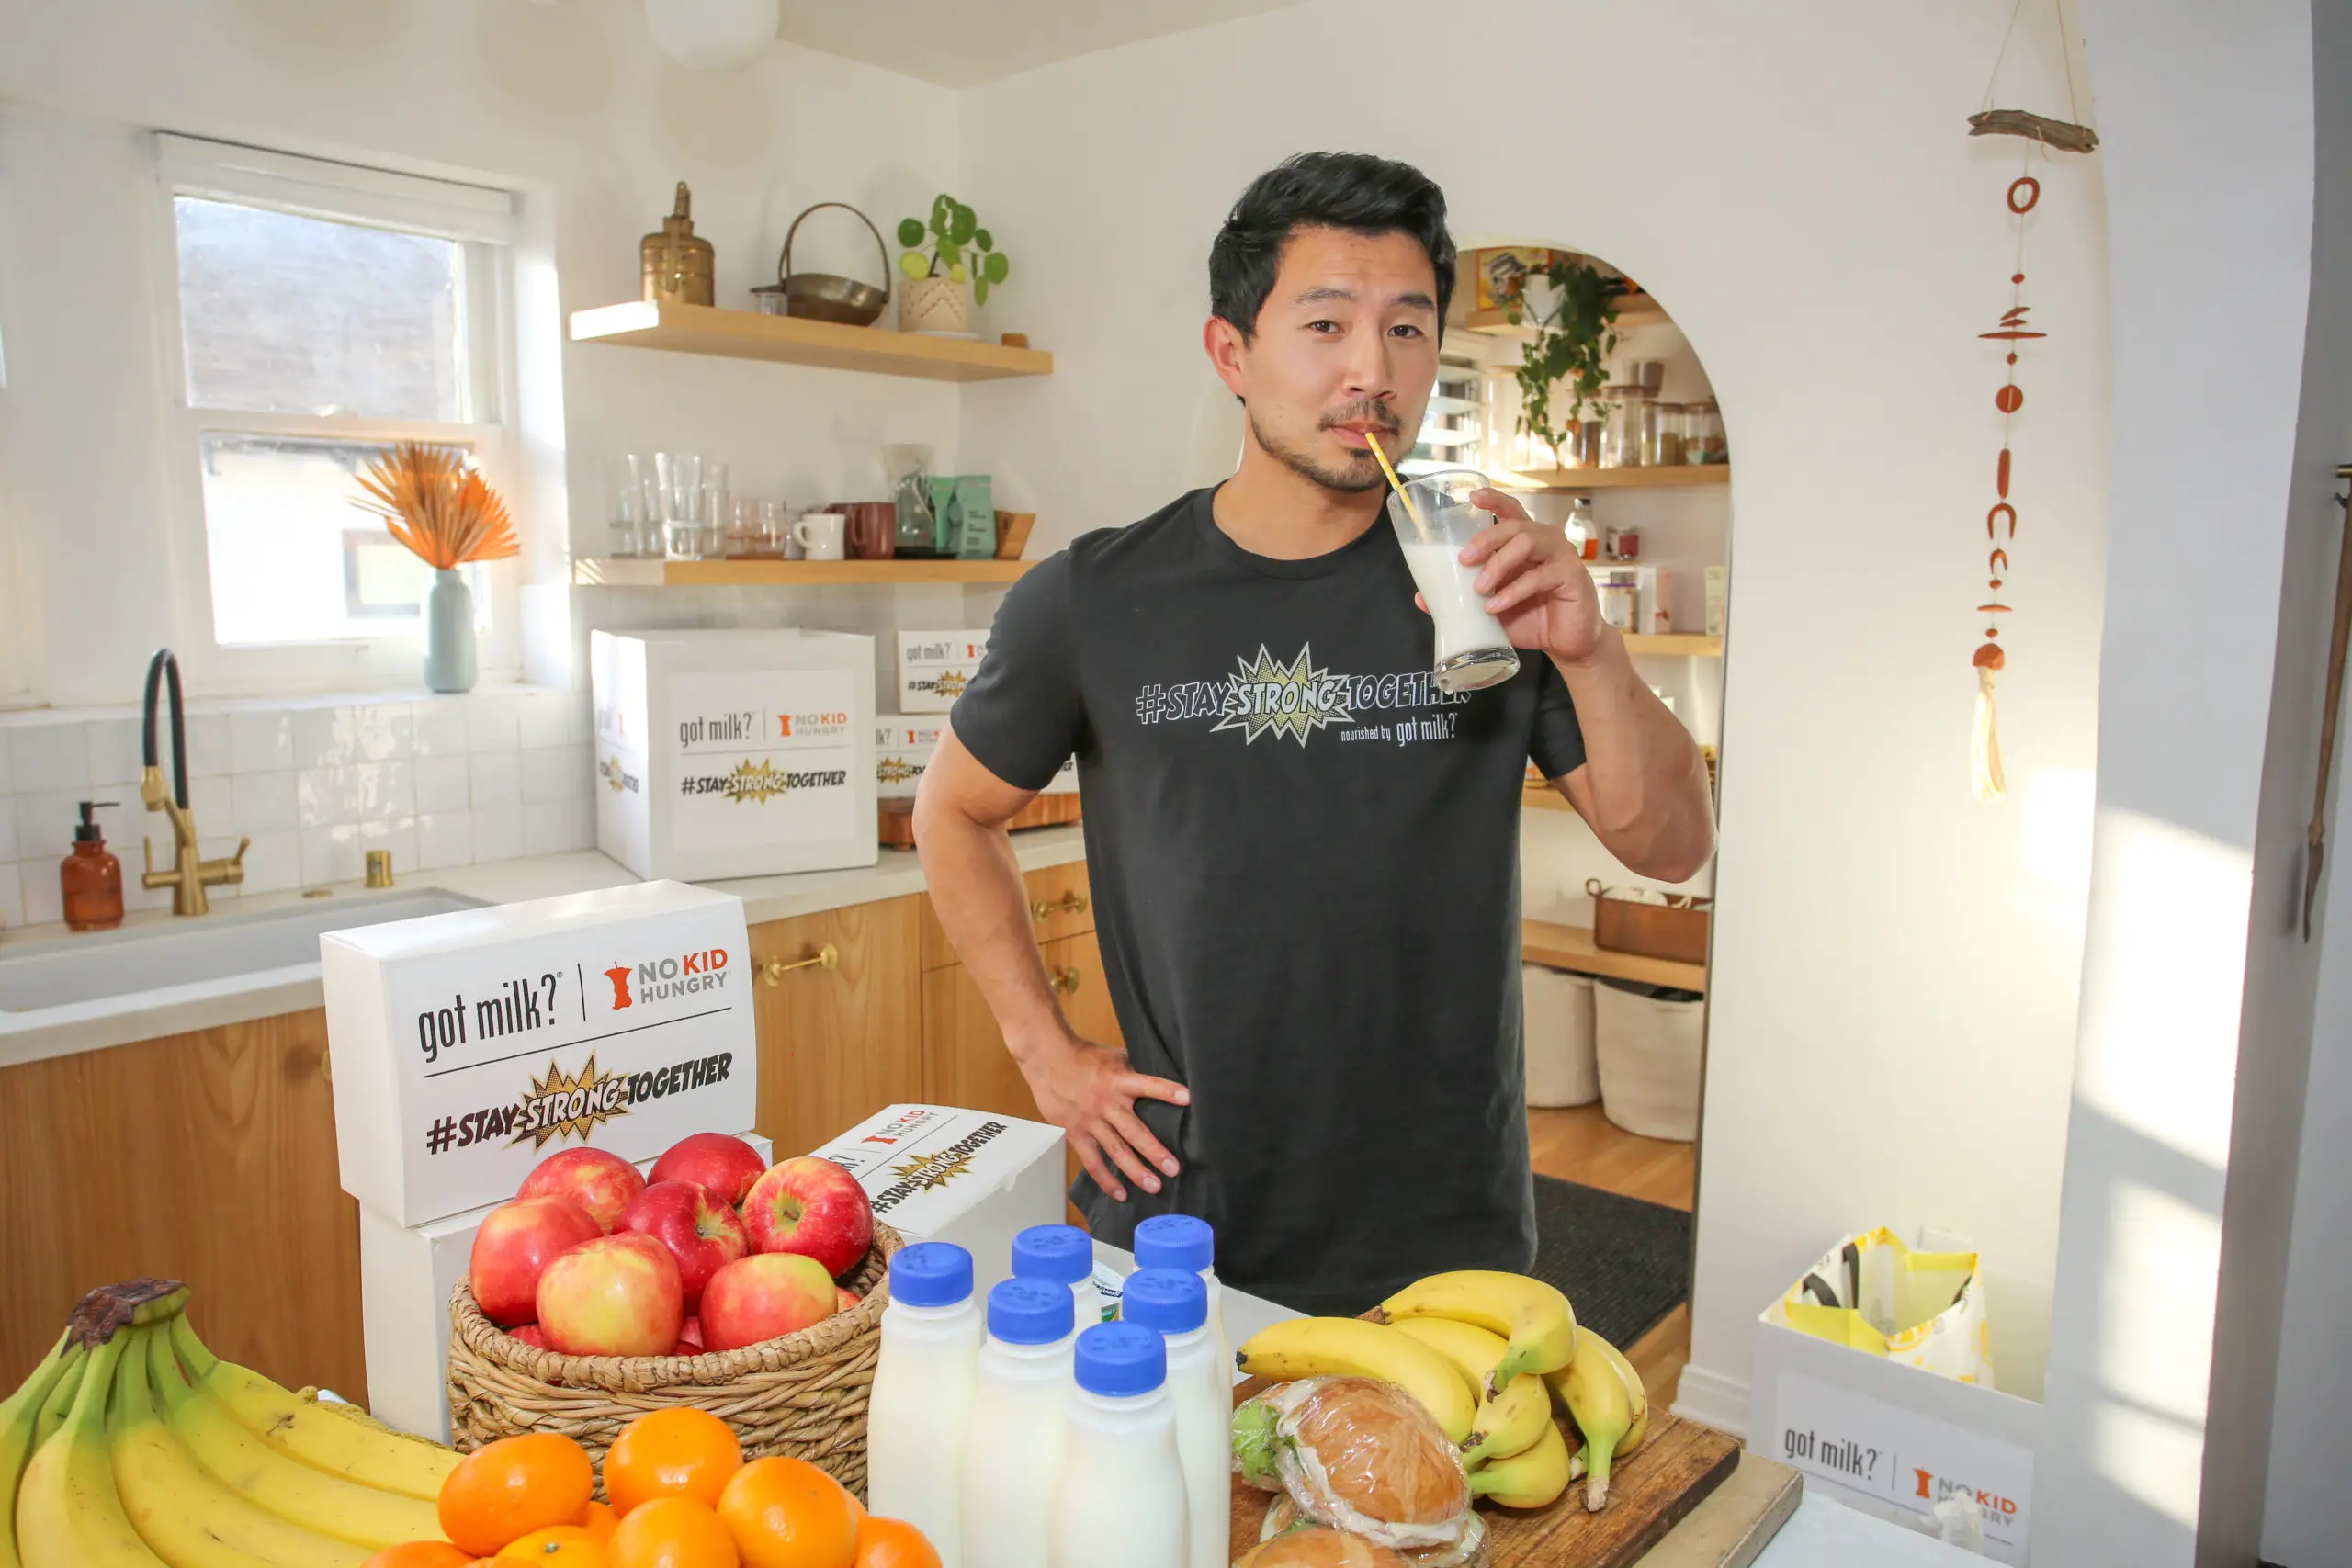 The Creators of 'got milk?' and Shang-Chi' Star Simu Liu Help Provide 1 Million Meals to California Kids Facing Hunger through #StayStrongTogether Initiative